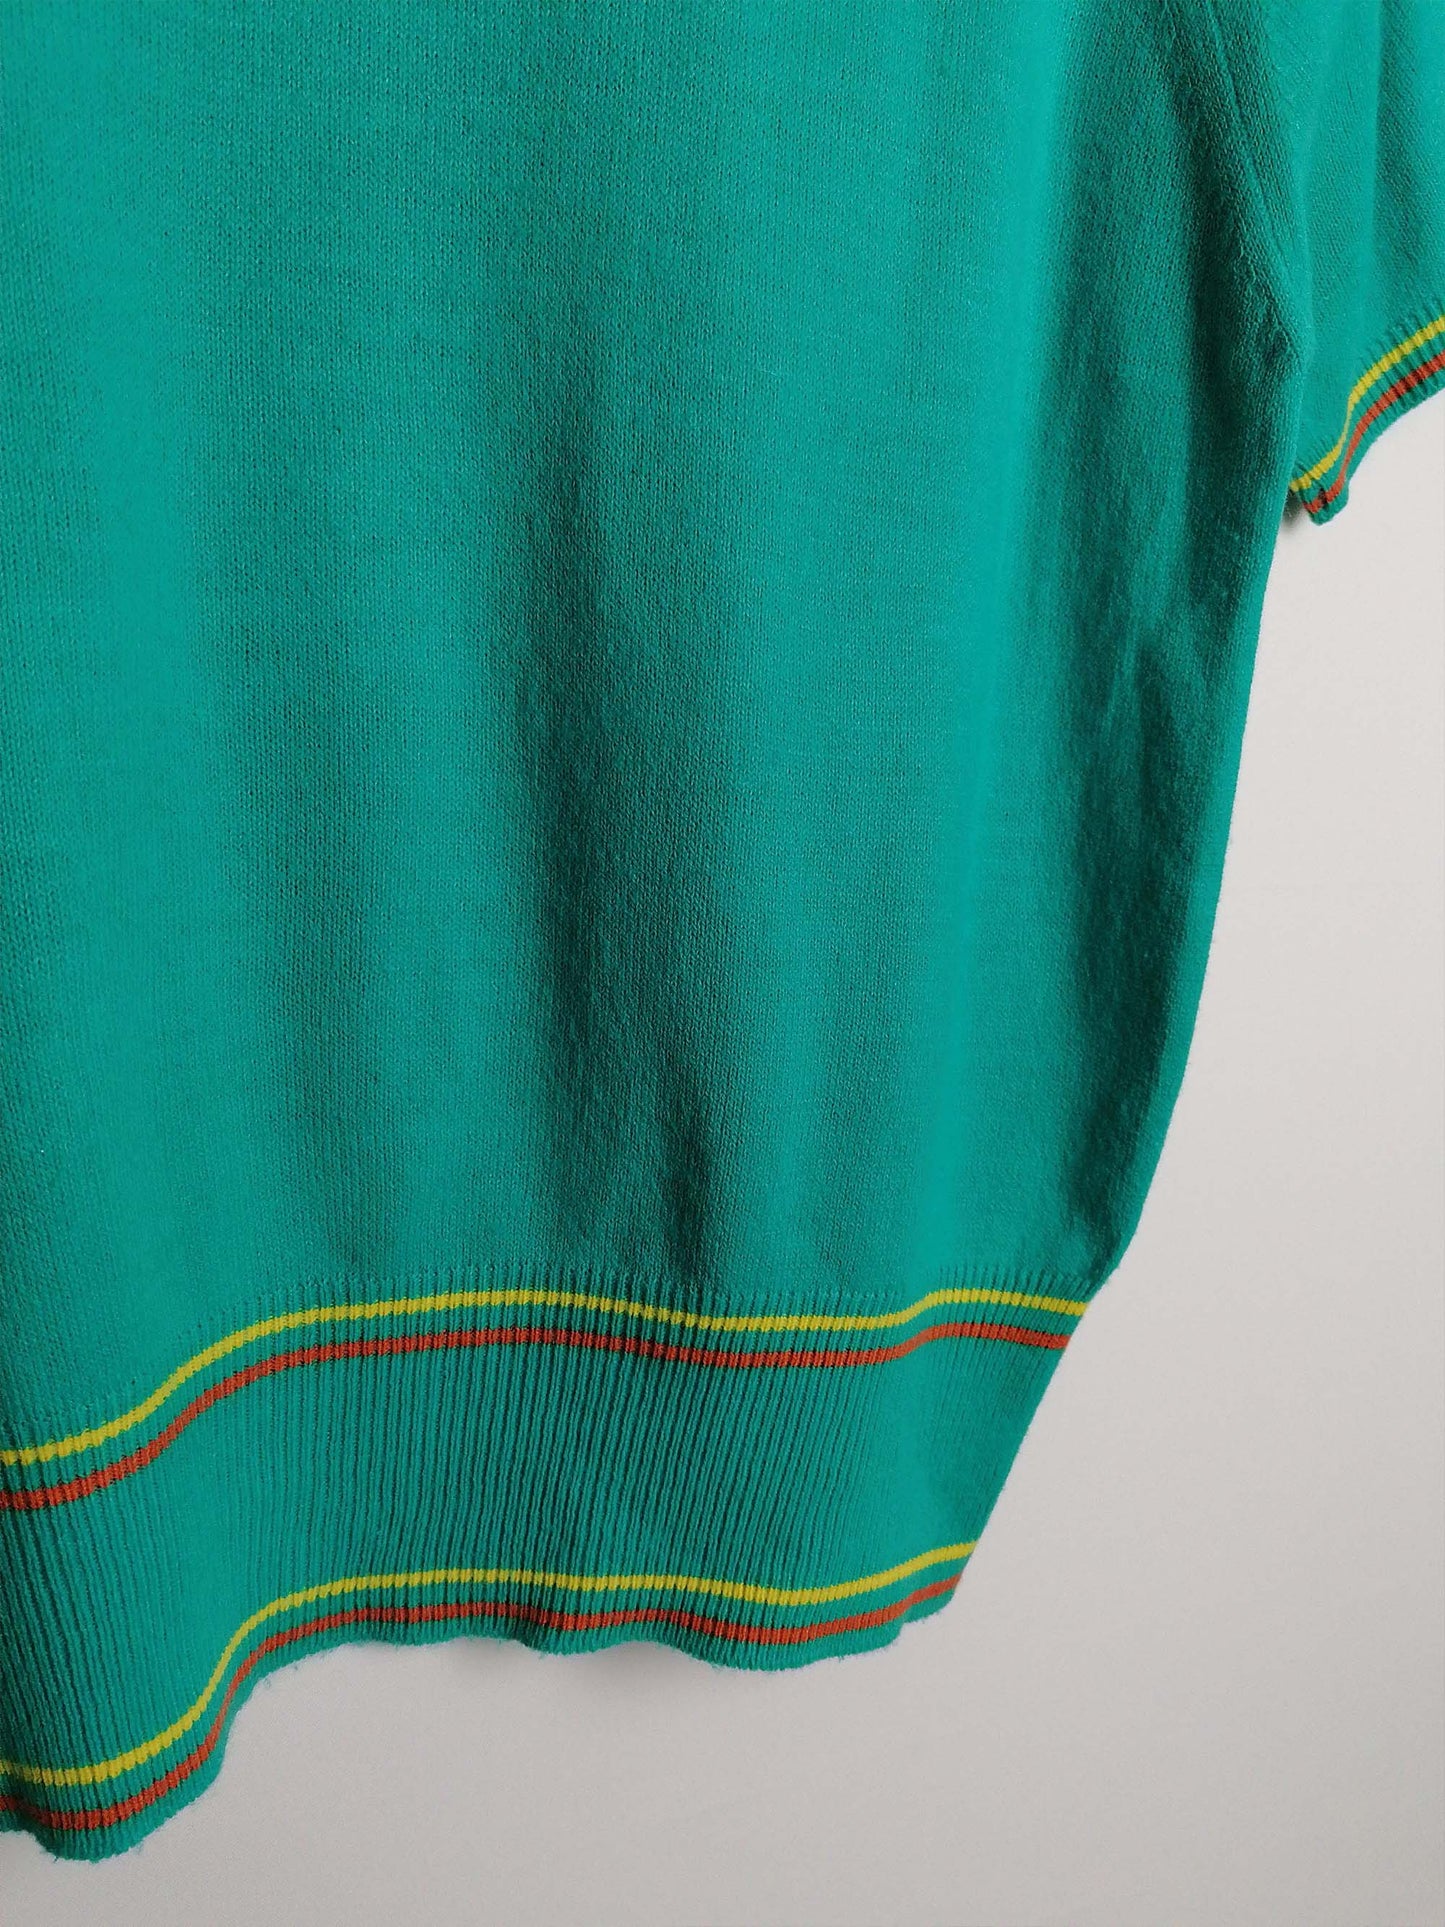 70's FILLEUR Soft Knit Top Retro Turquoise Green - size S-M